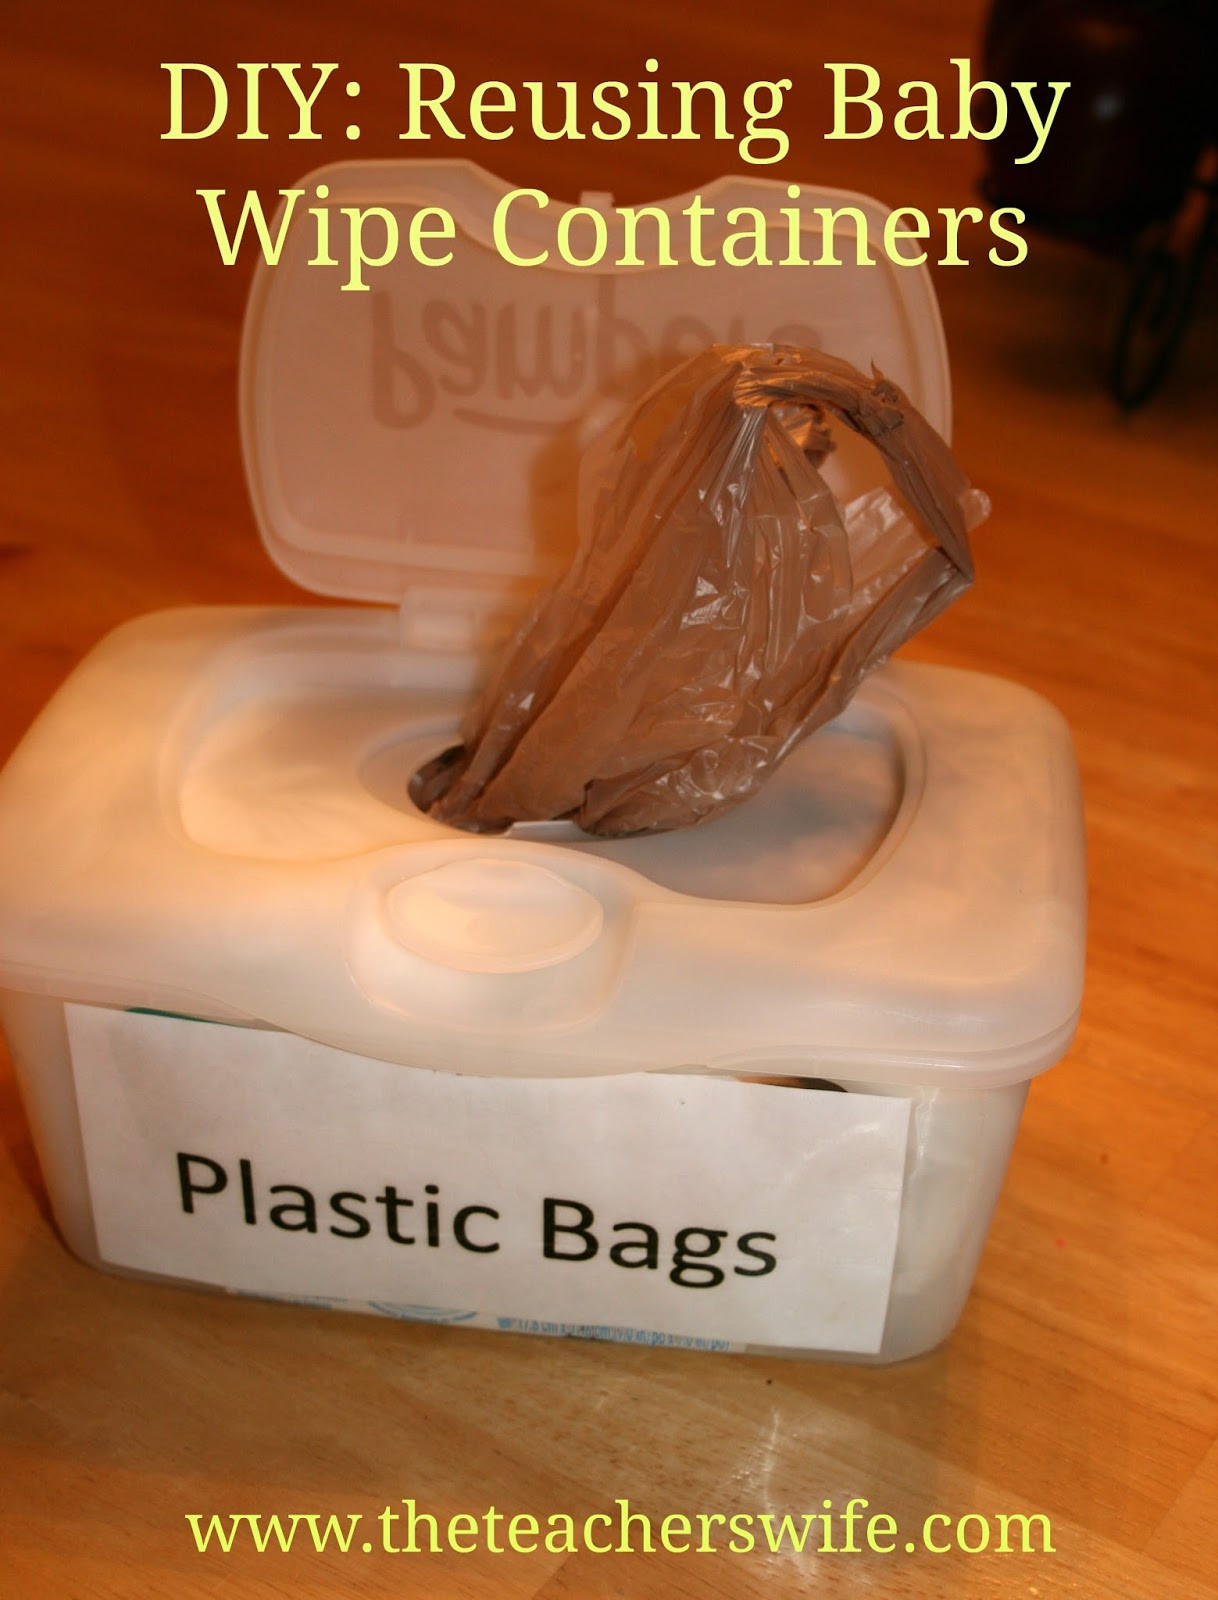 Diy Baby Wipes Container
 The Teacher s Wife DIY Reusing Baby Wipes Containers to